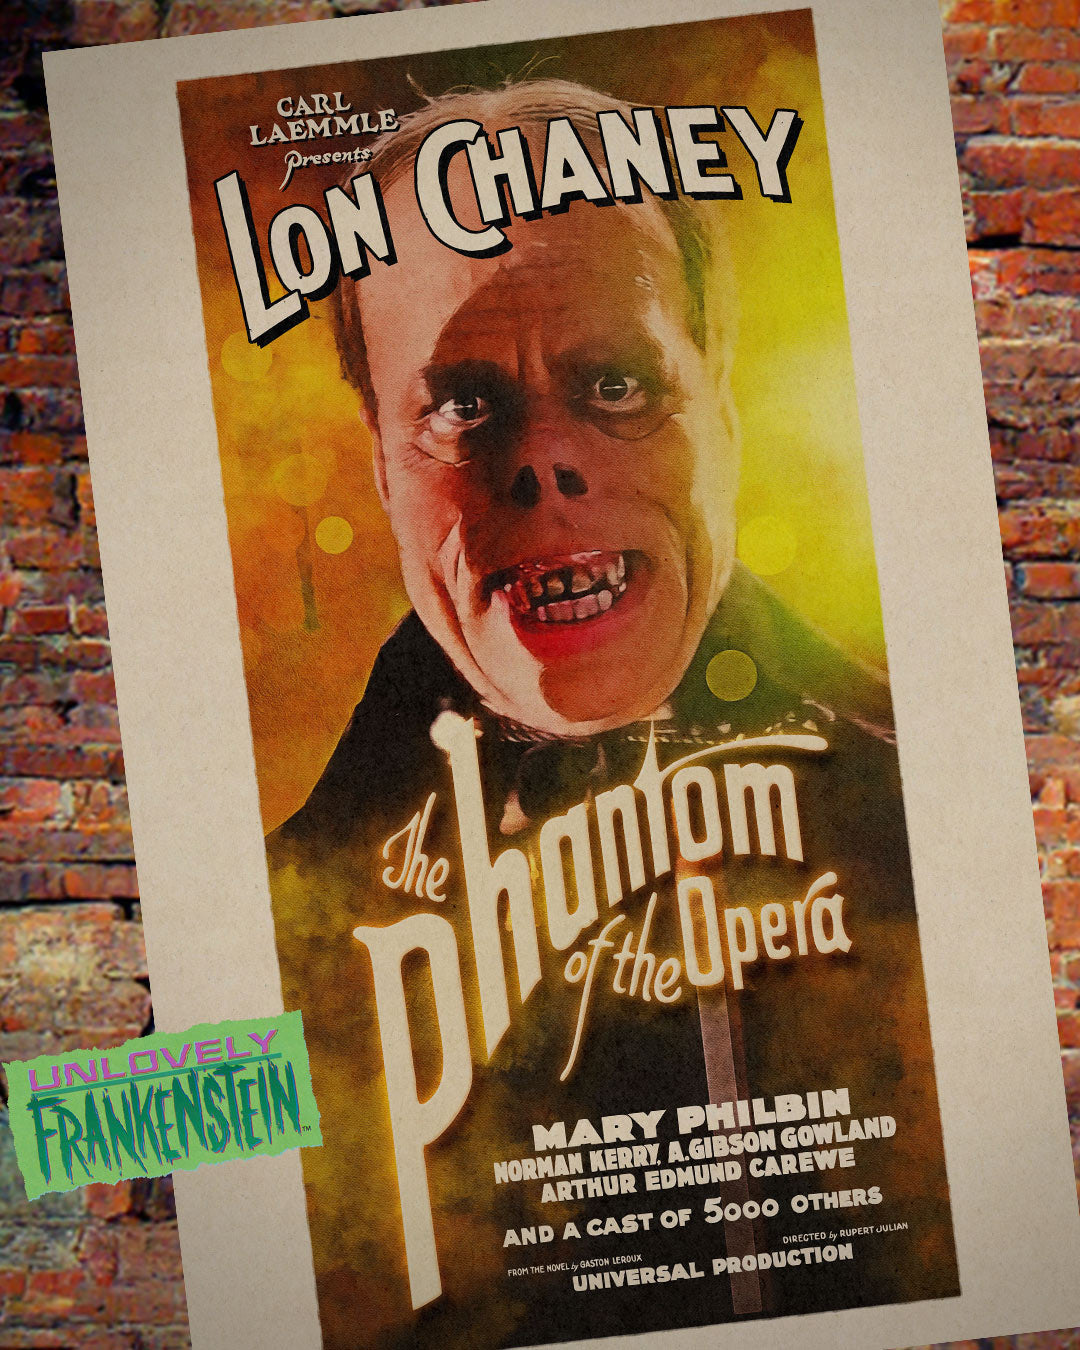 Lon Chaney as The Phantom of the Opera character poster | 11x17 Art Print